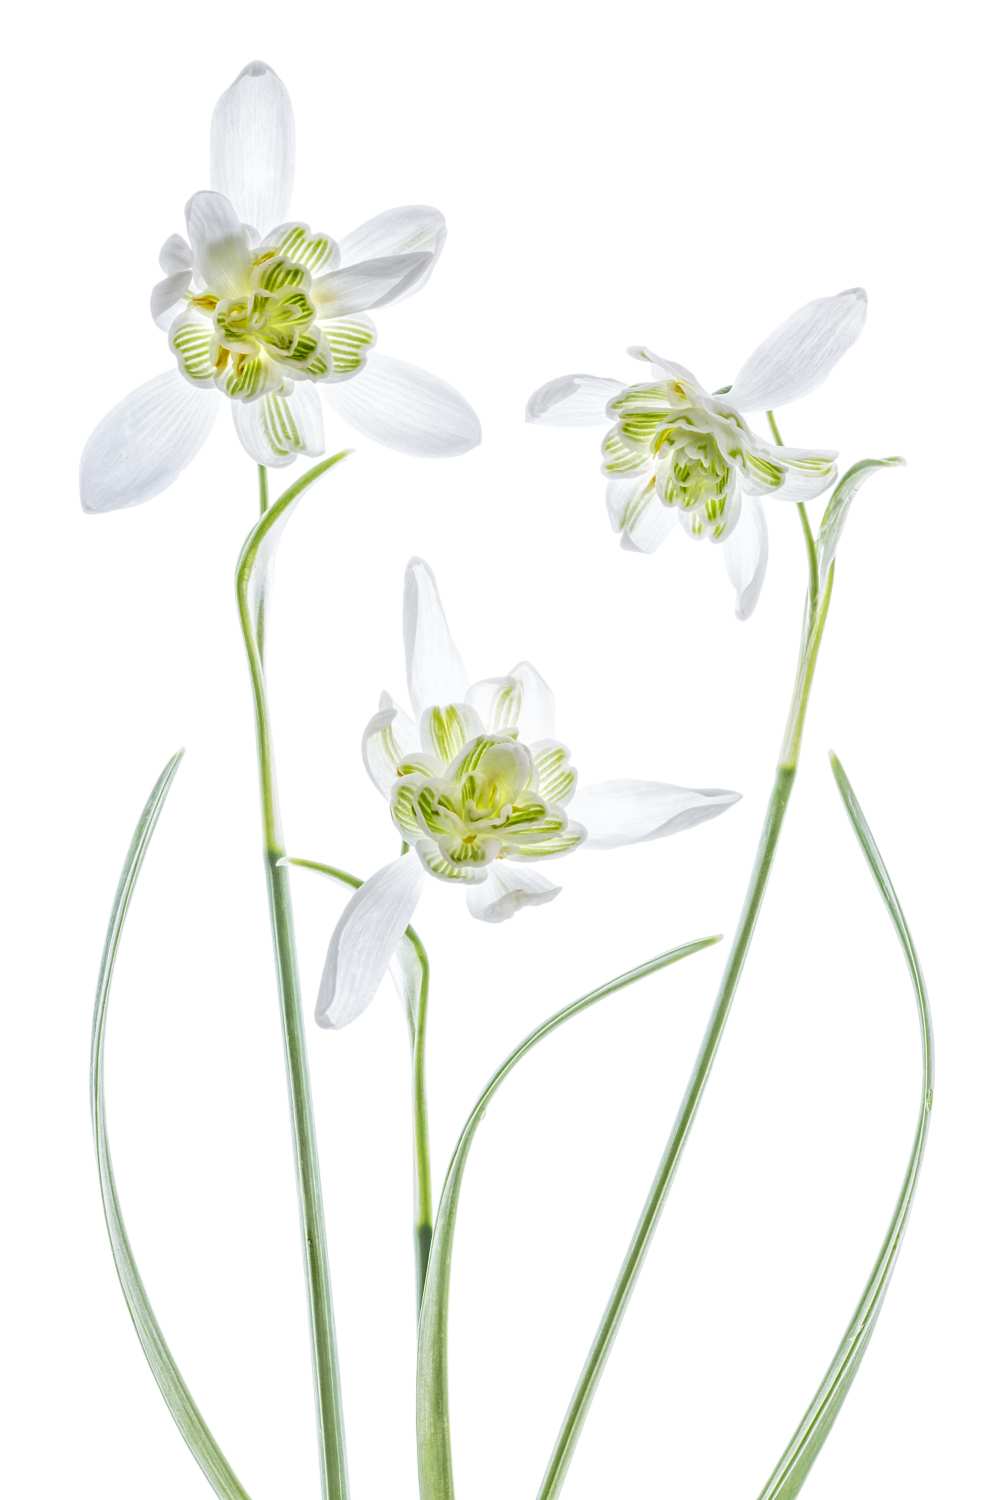 Galanthus Flore Pleno from Mandy Disher